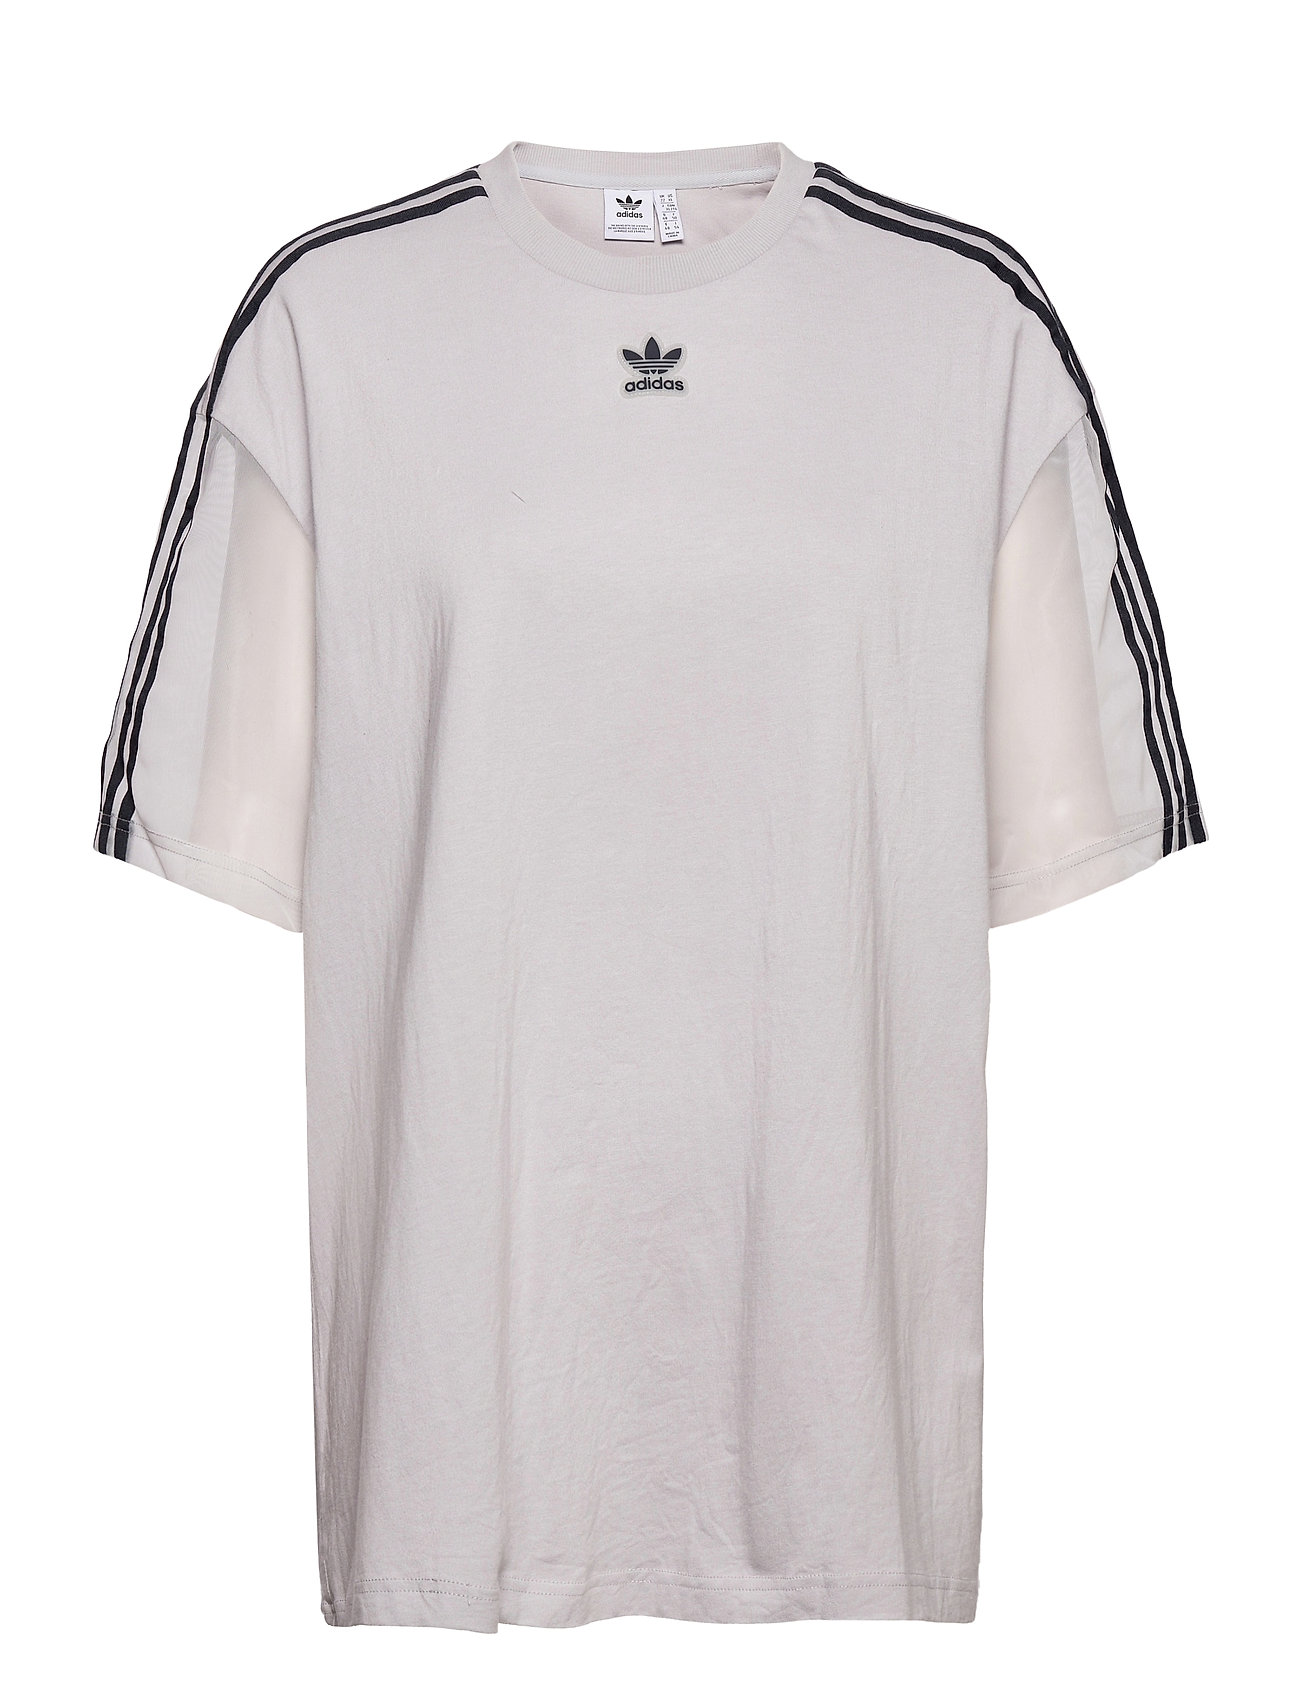 adidas t shirt outlet